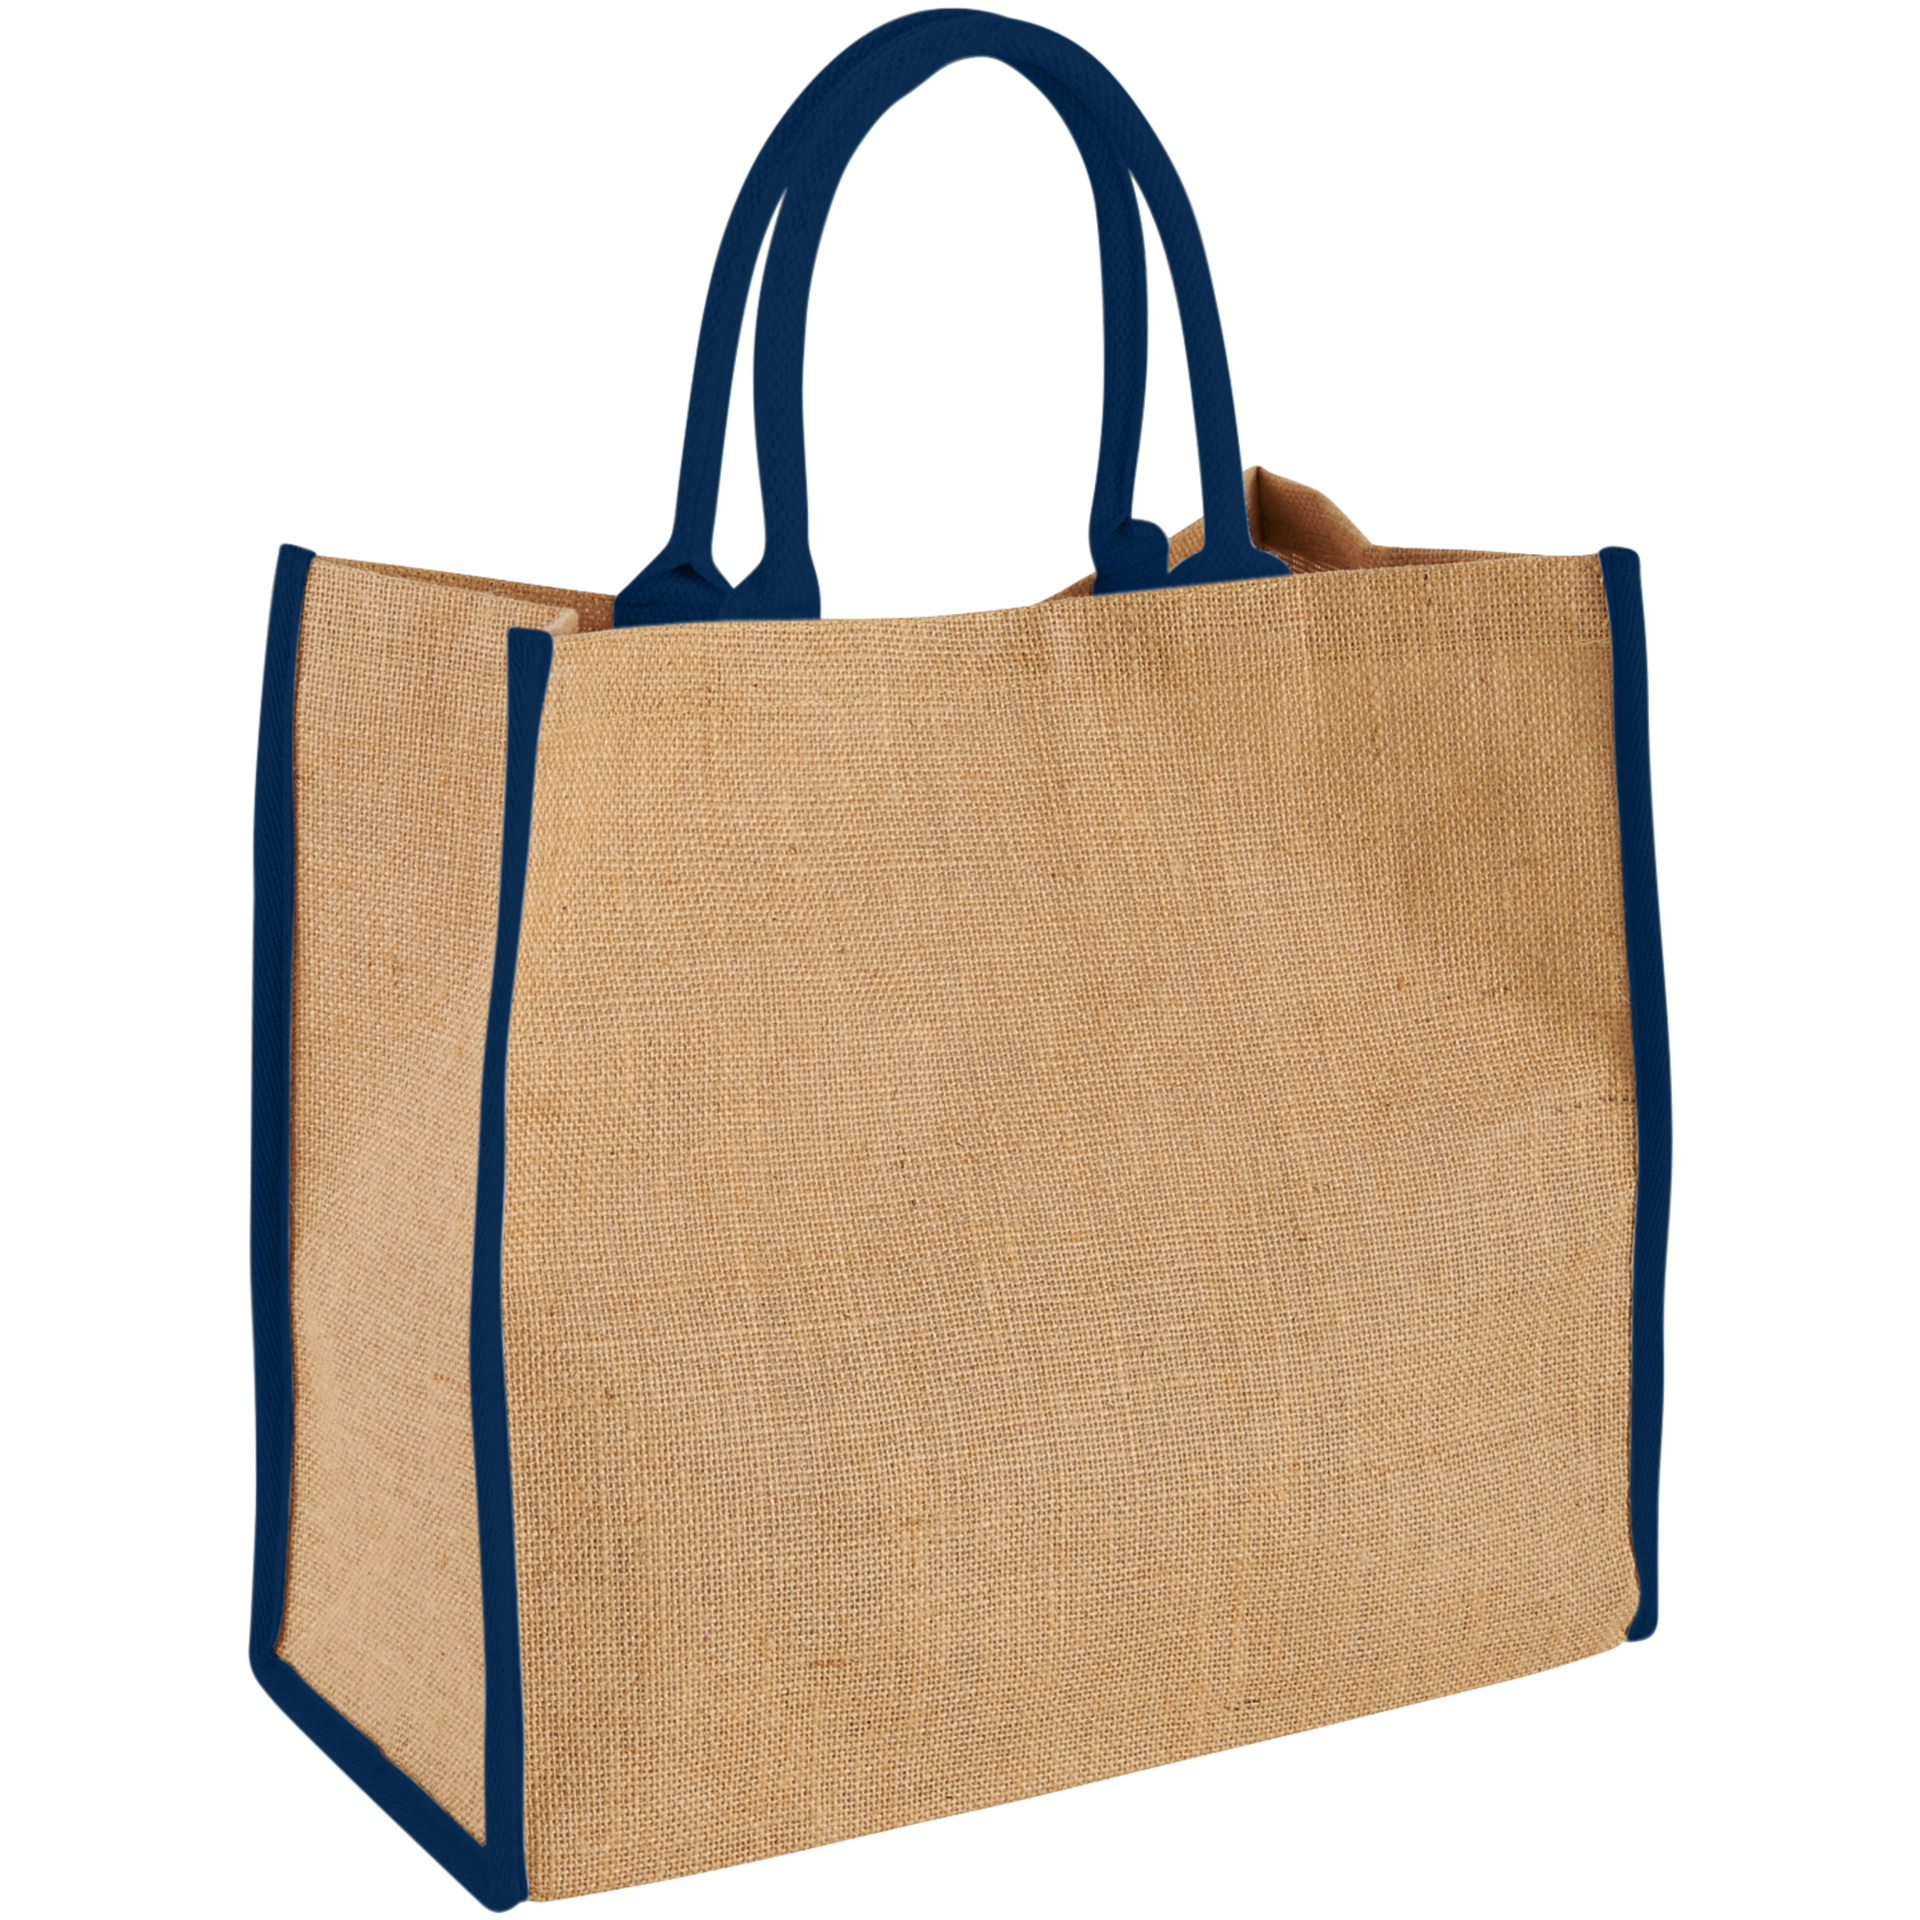 Natural jute bag with blue trim and handles